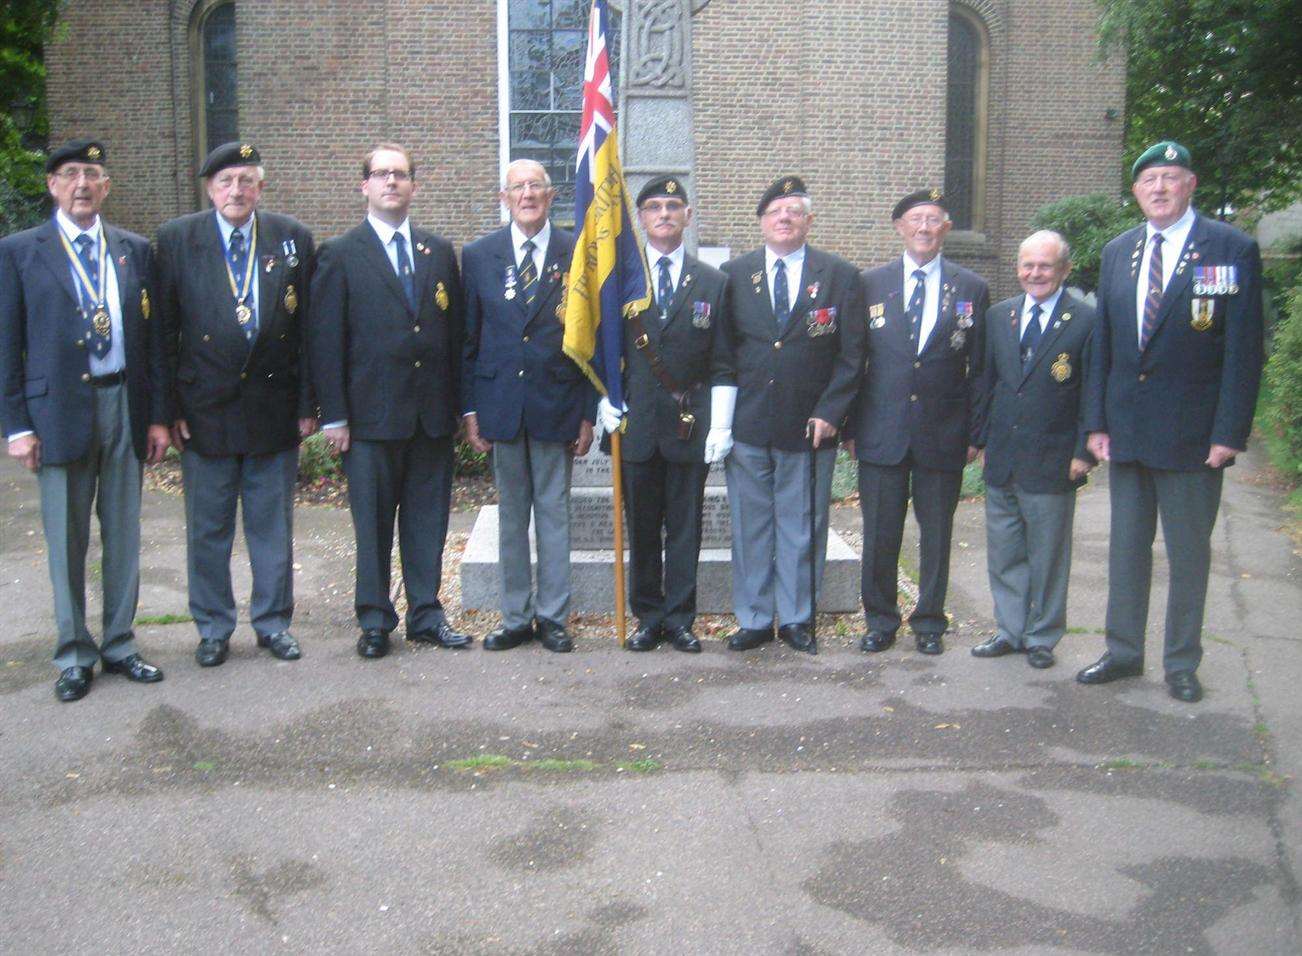 Members of the Royal British Legion Downs Branch and standard bearers from ex-service organisations took part the Kent county parade